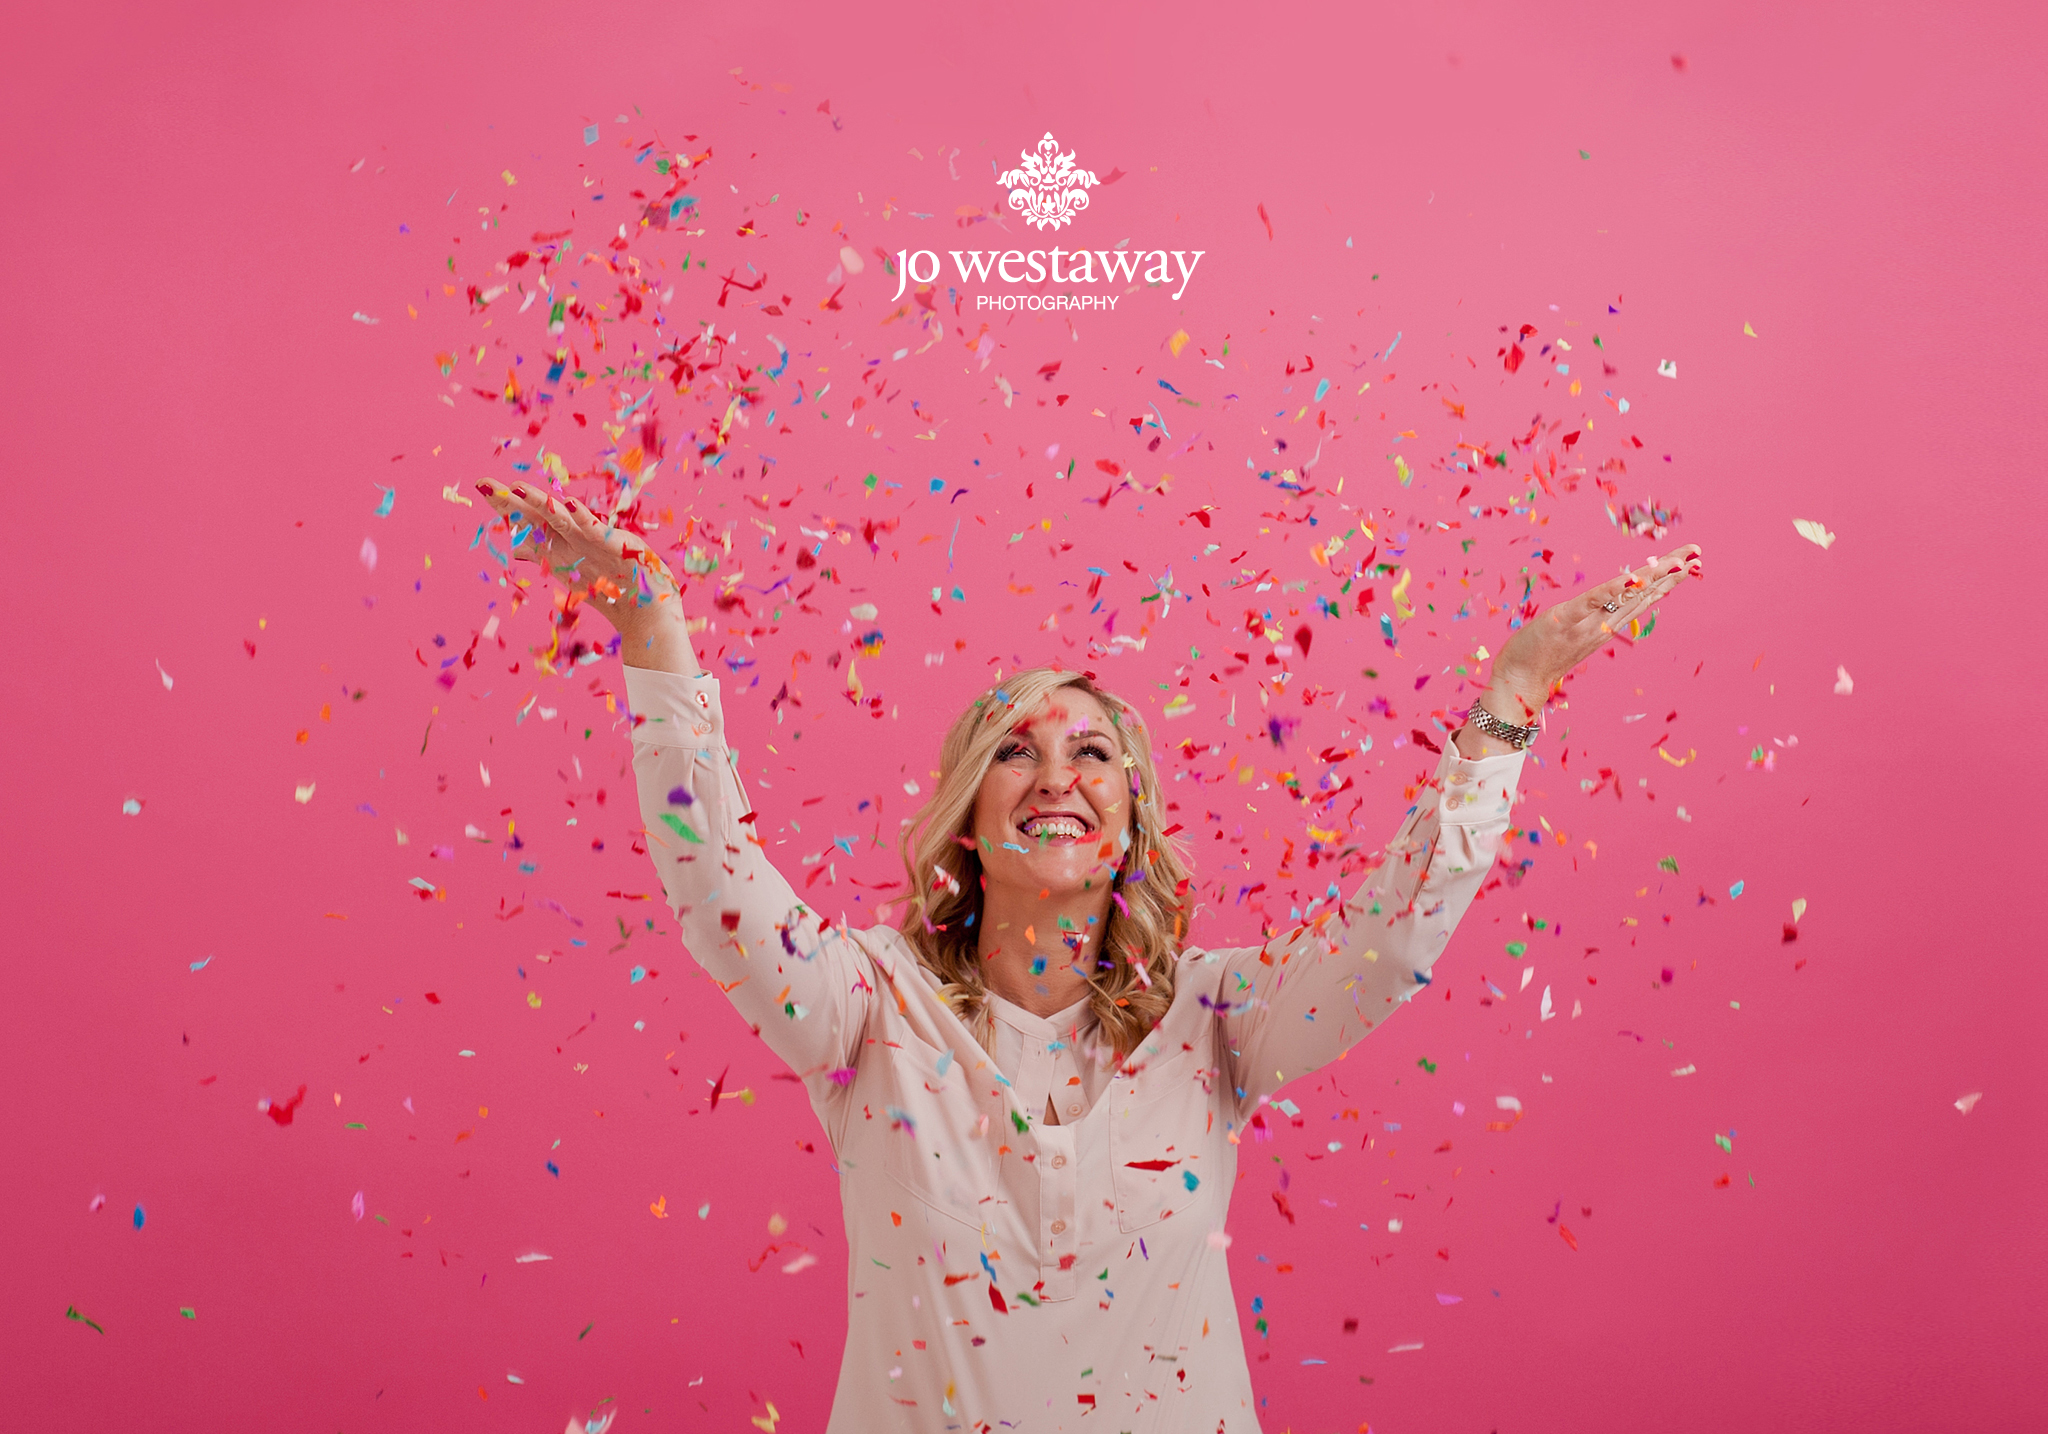 Have fun with your business photos, branding images and headshots - throw confetti, hold balloons, laugh and smile